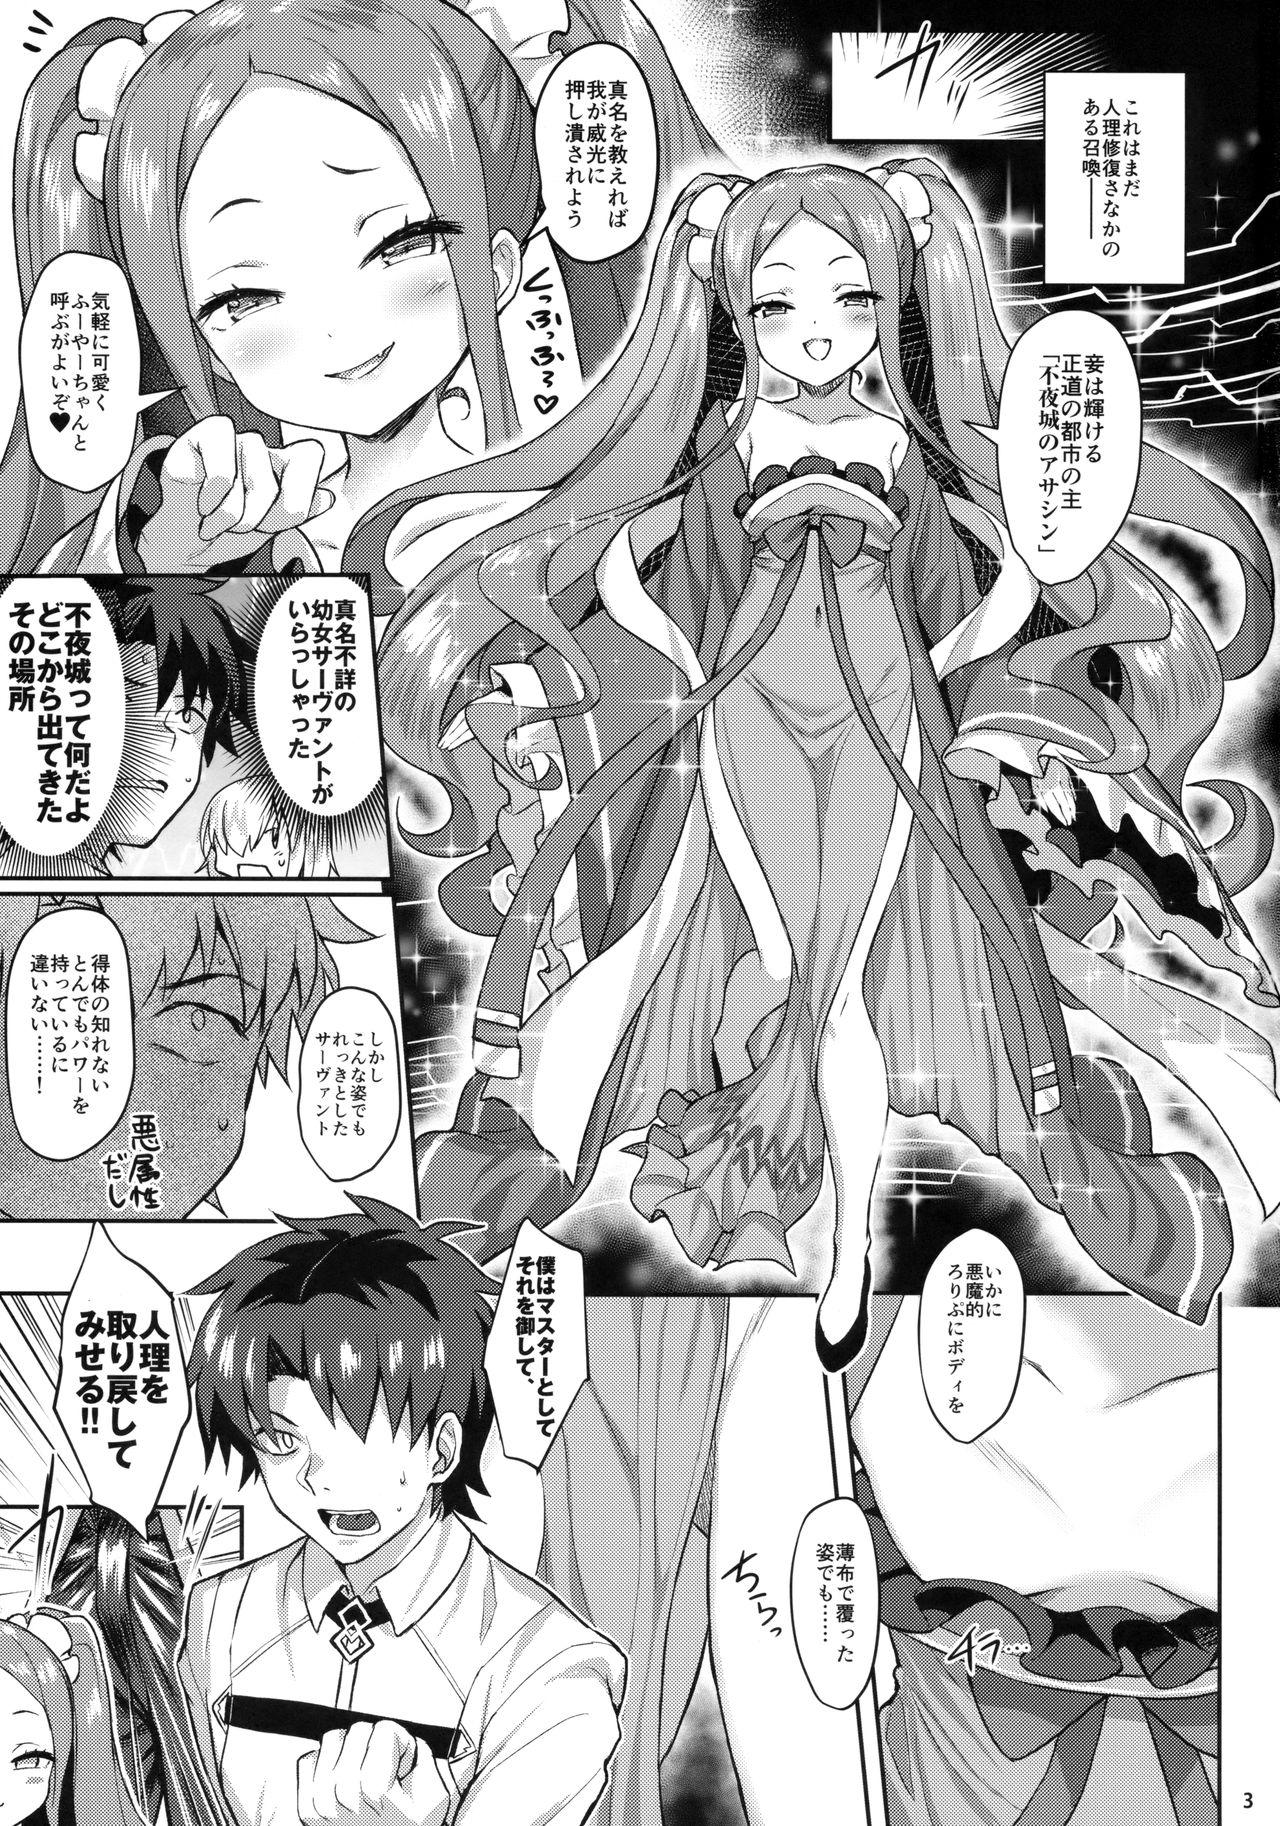 Anal Play Fuya Syndrome - Sleepless Syndrome - Fate grand order Highschool - Page 2